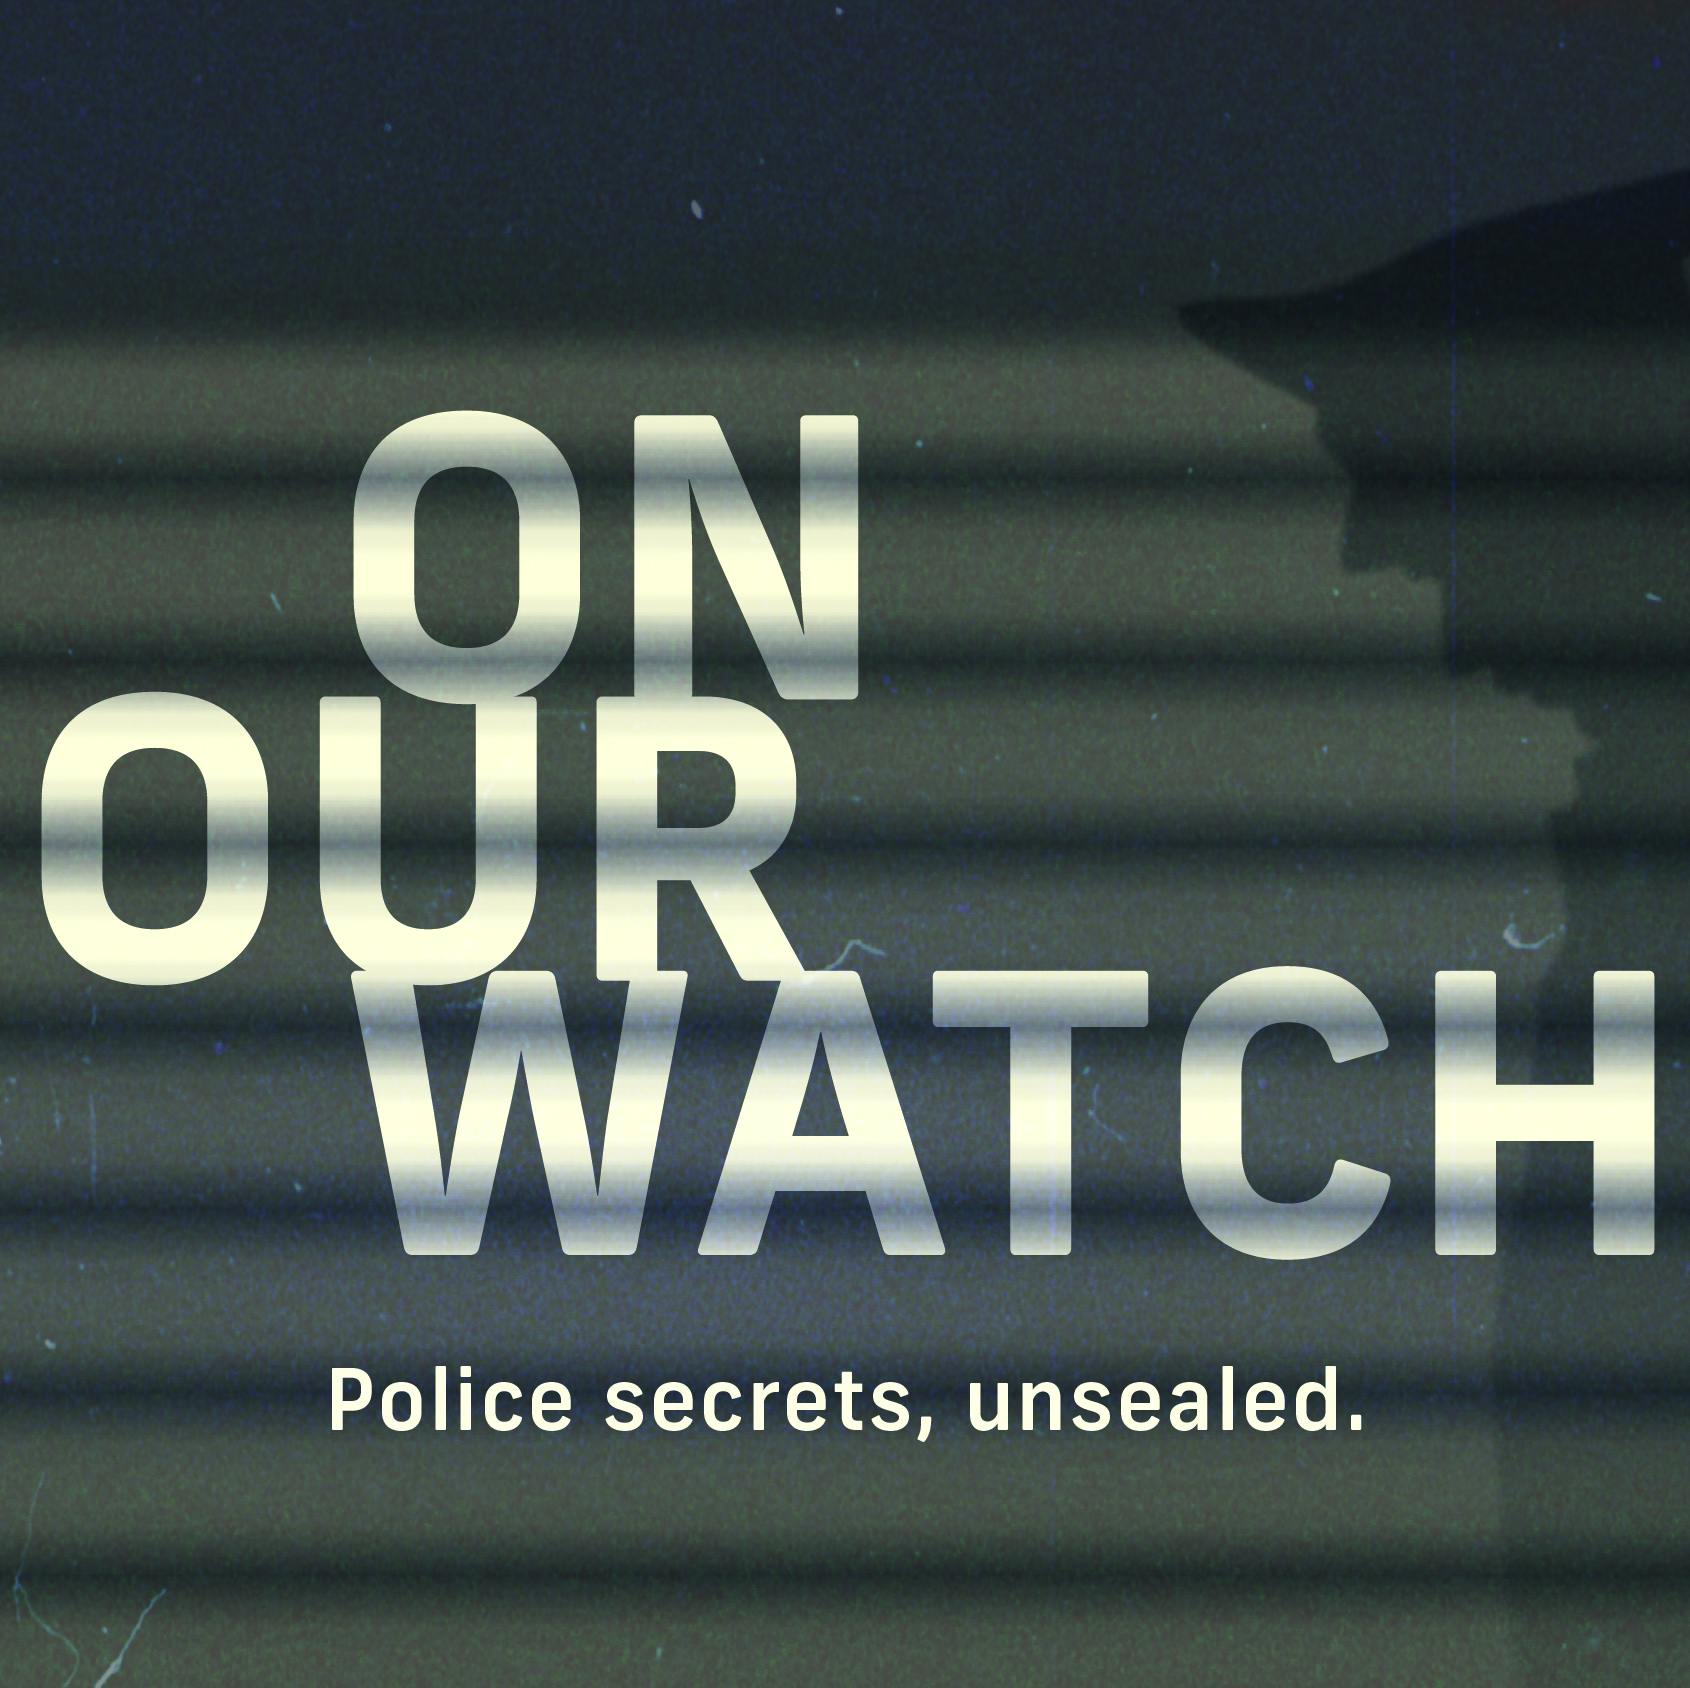 Introducing On Our Watch from NPR and KQED